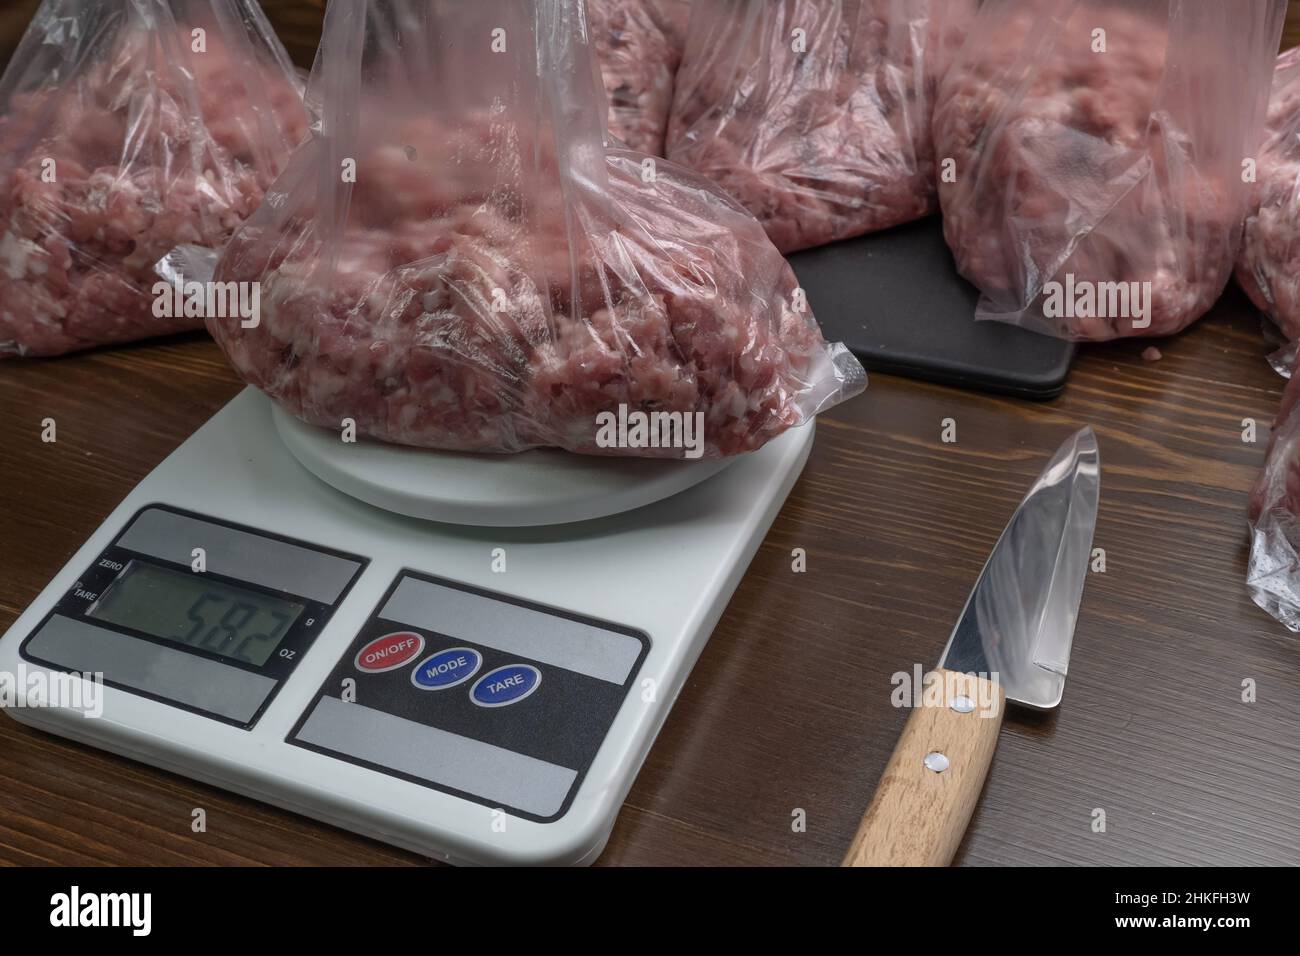 27,367 Meat On Scales Images, Stock Photos, 3D objects, & Vectors